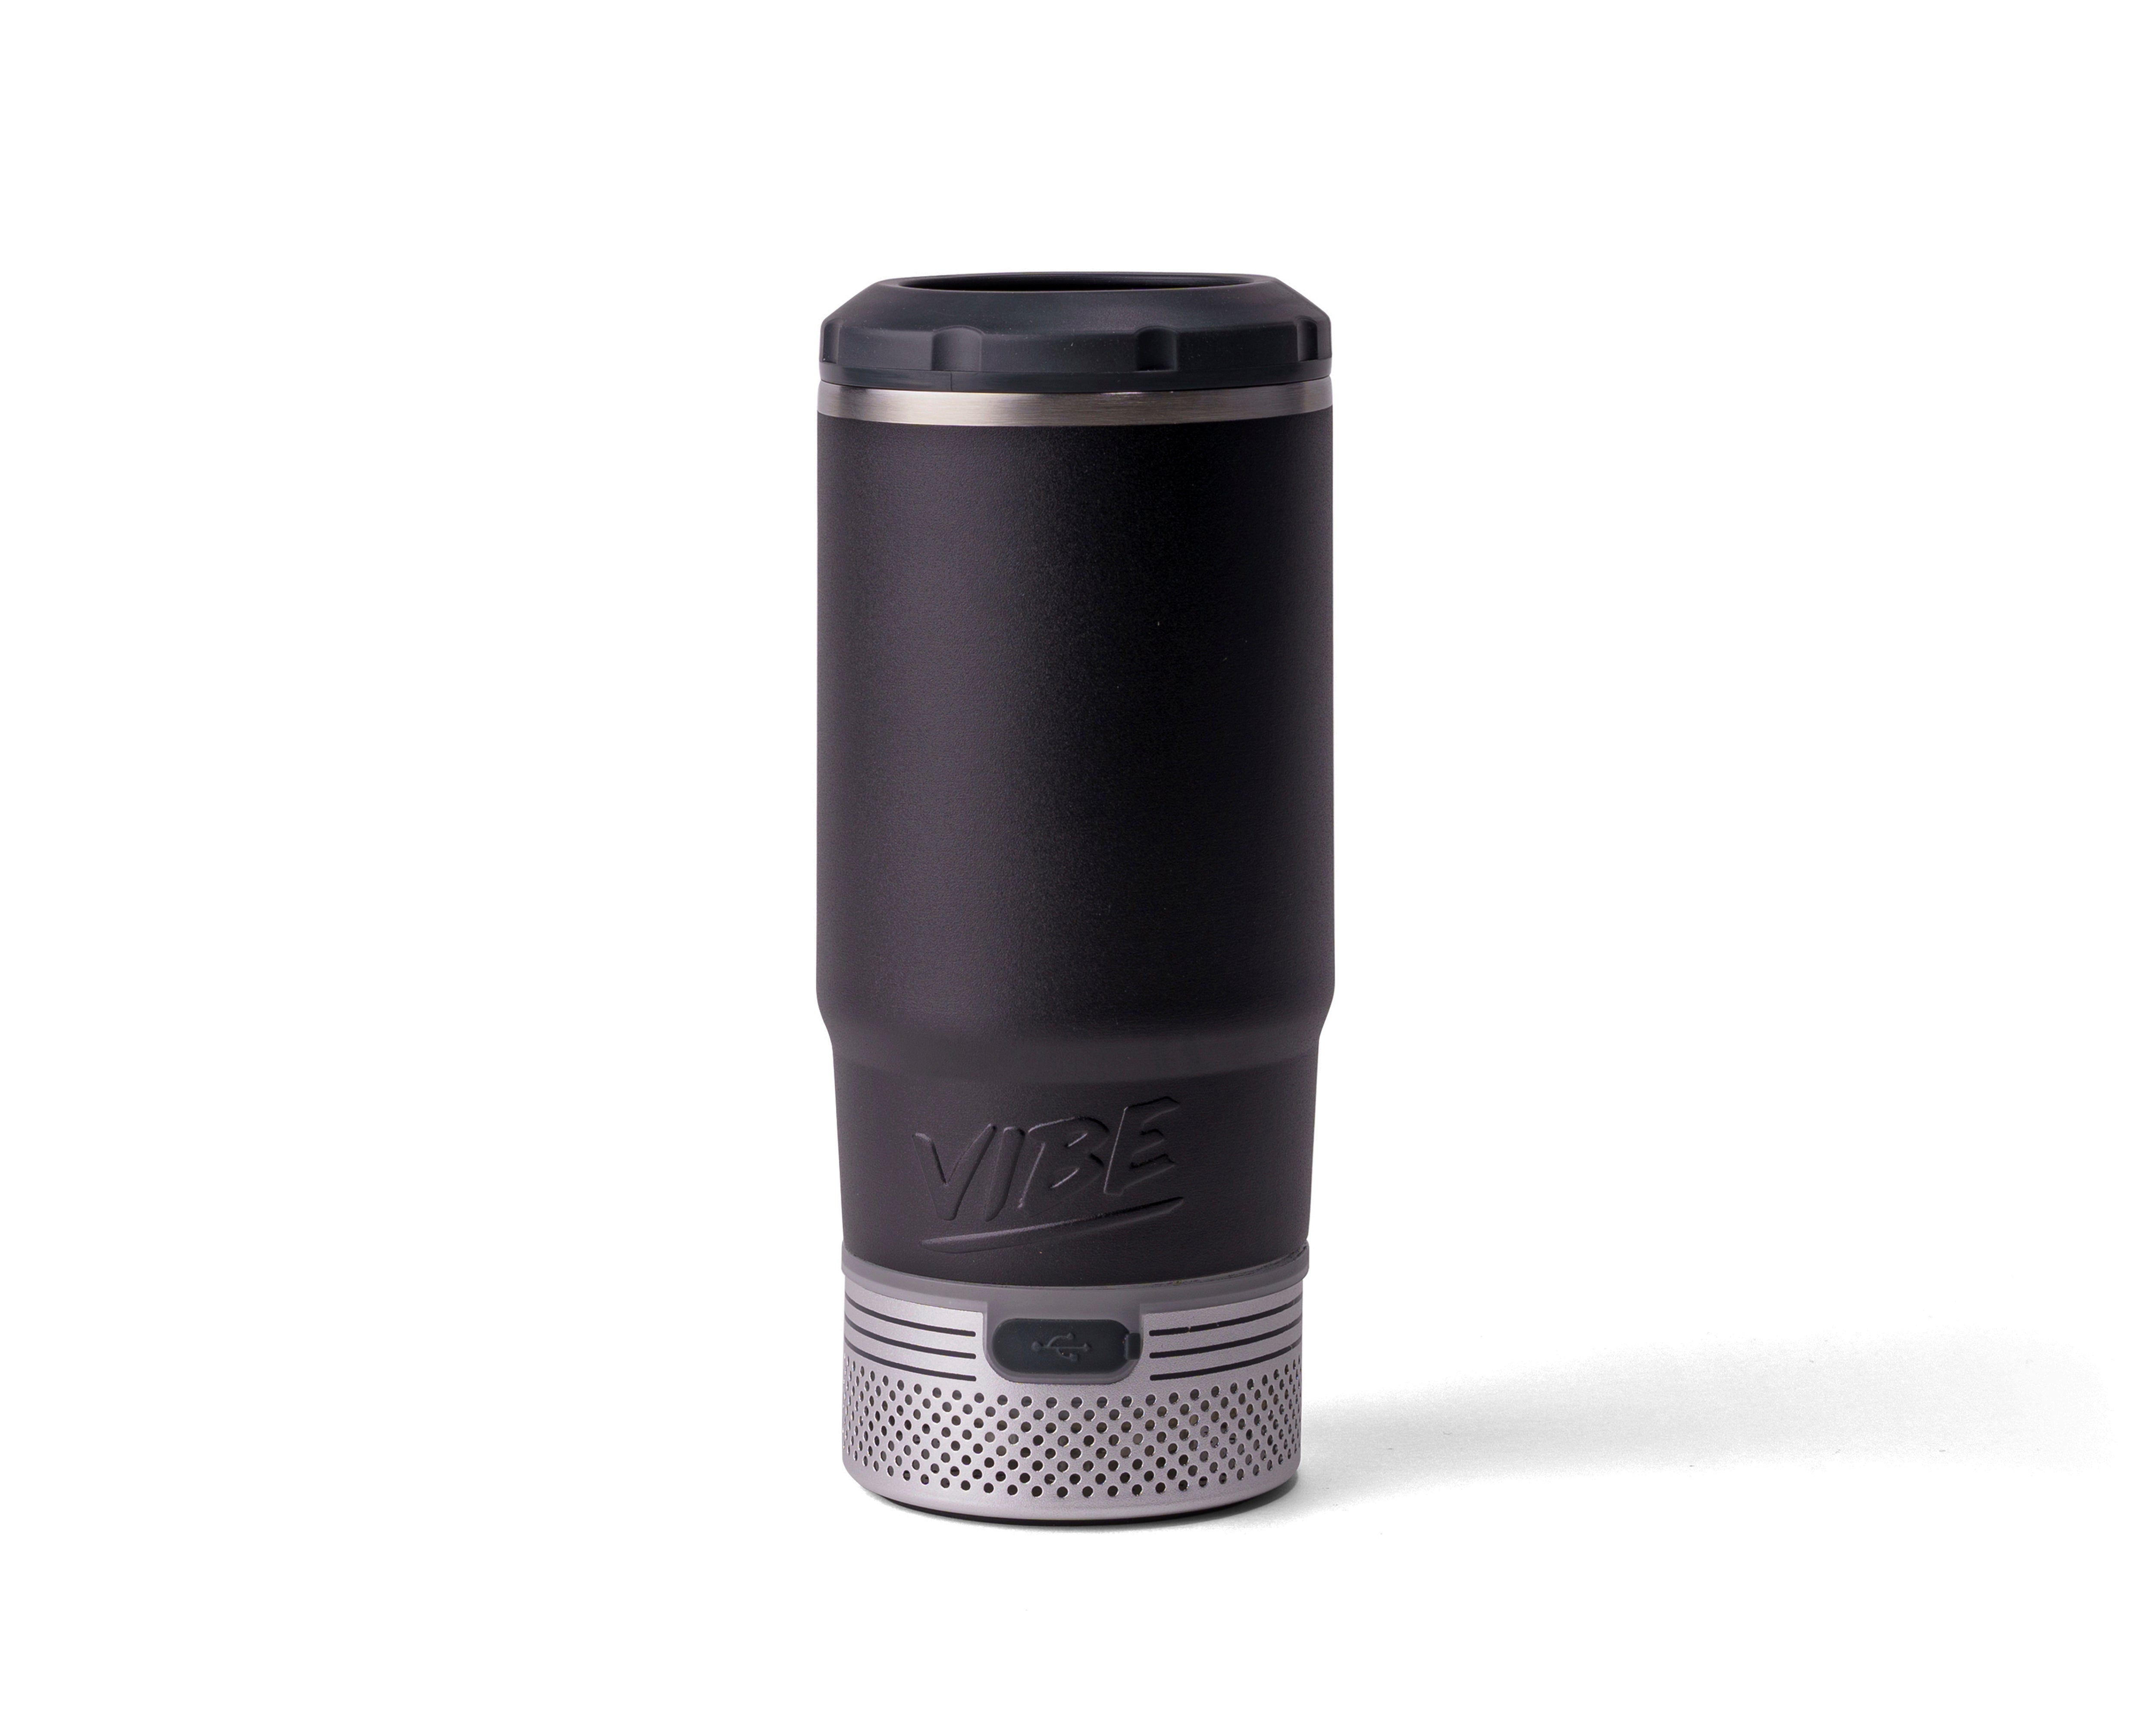 Vibe 4-IN-1 Drink Cooler with Base Speaker Attachment